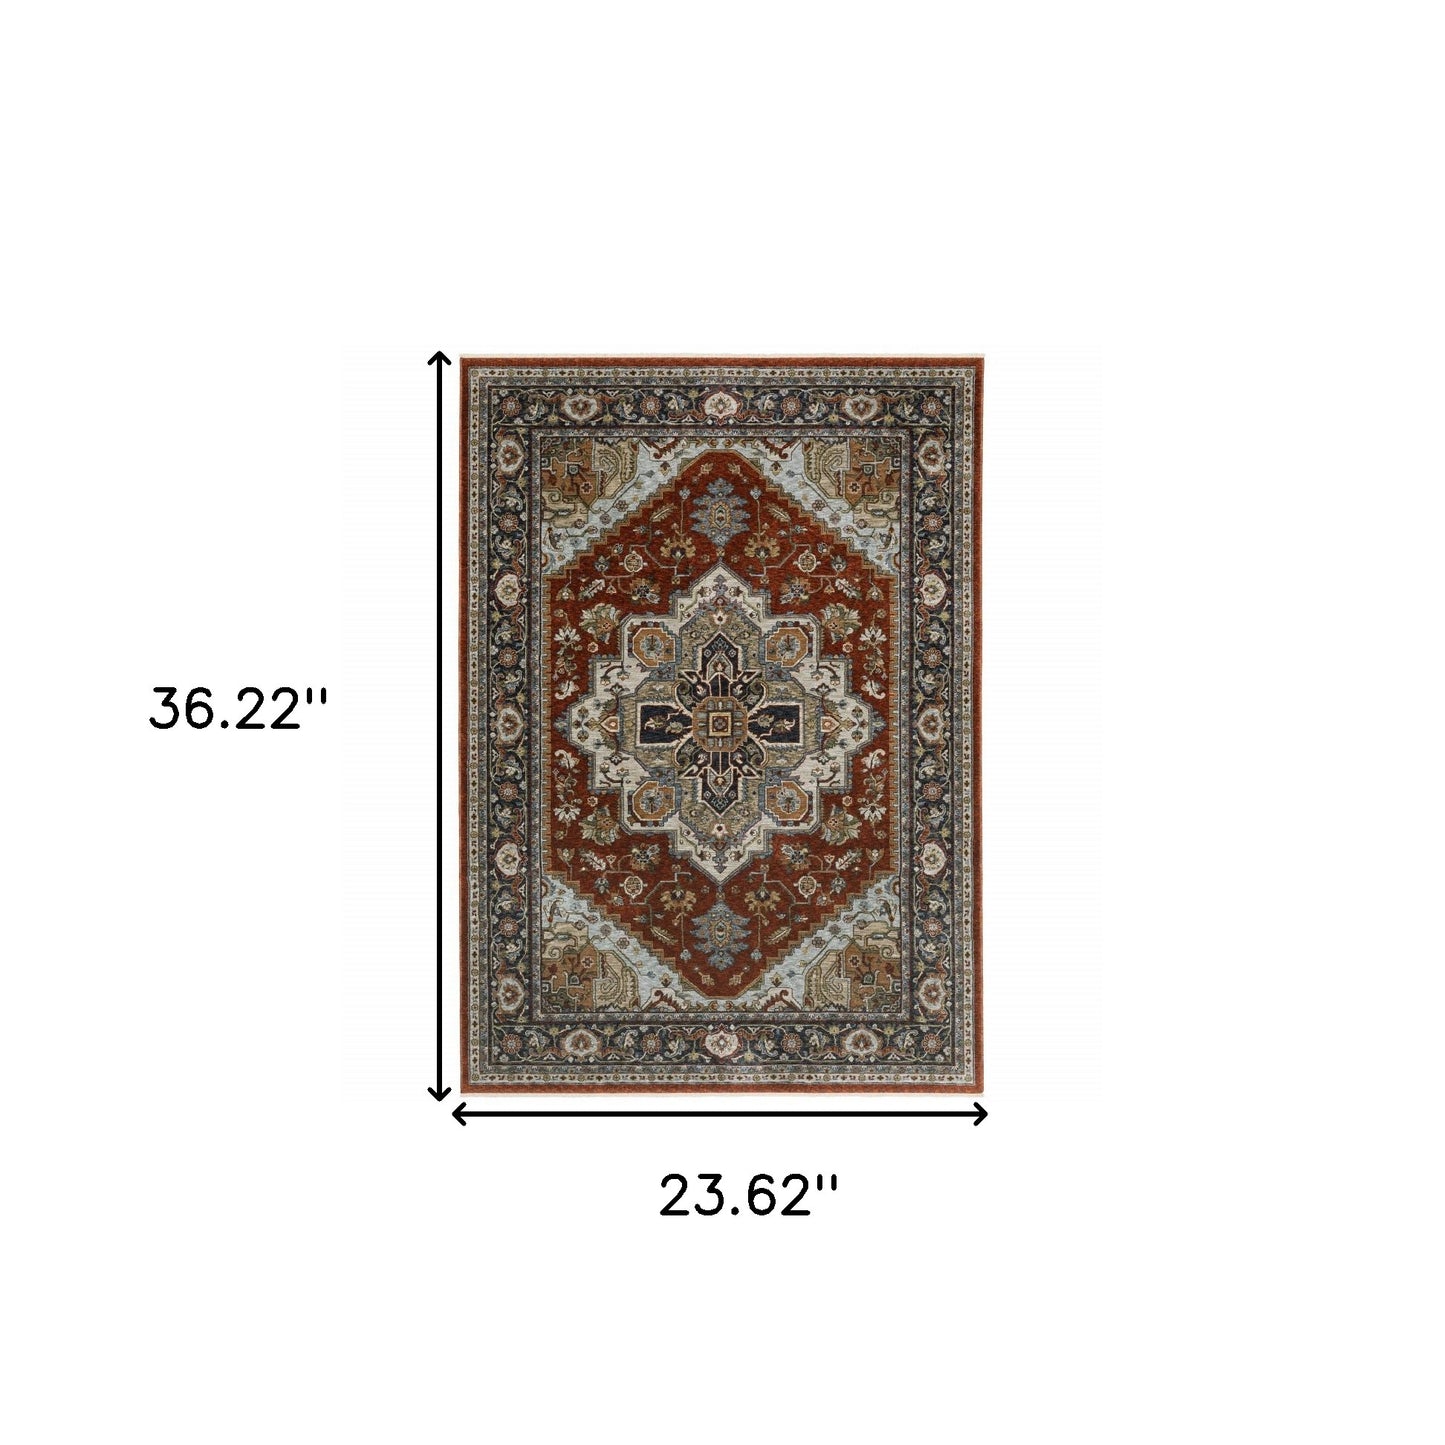 2' X 3' Blue Beige Grey Gold Green And Rust Red Oriental Power Loom Stain Resistant Area Rug With Fringe